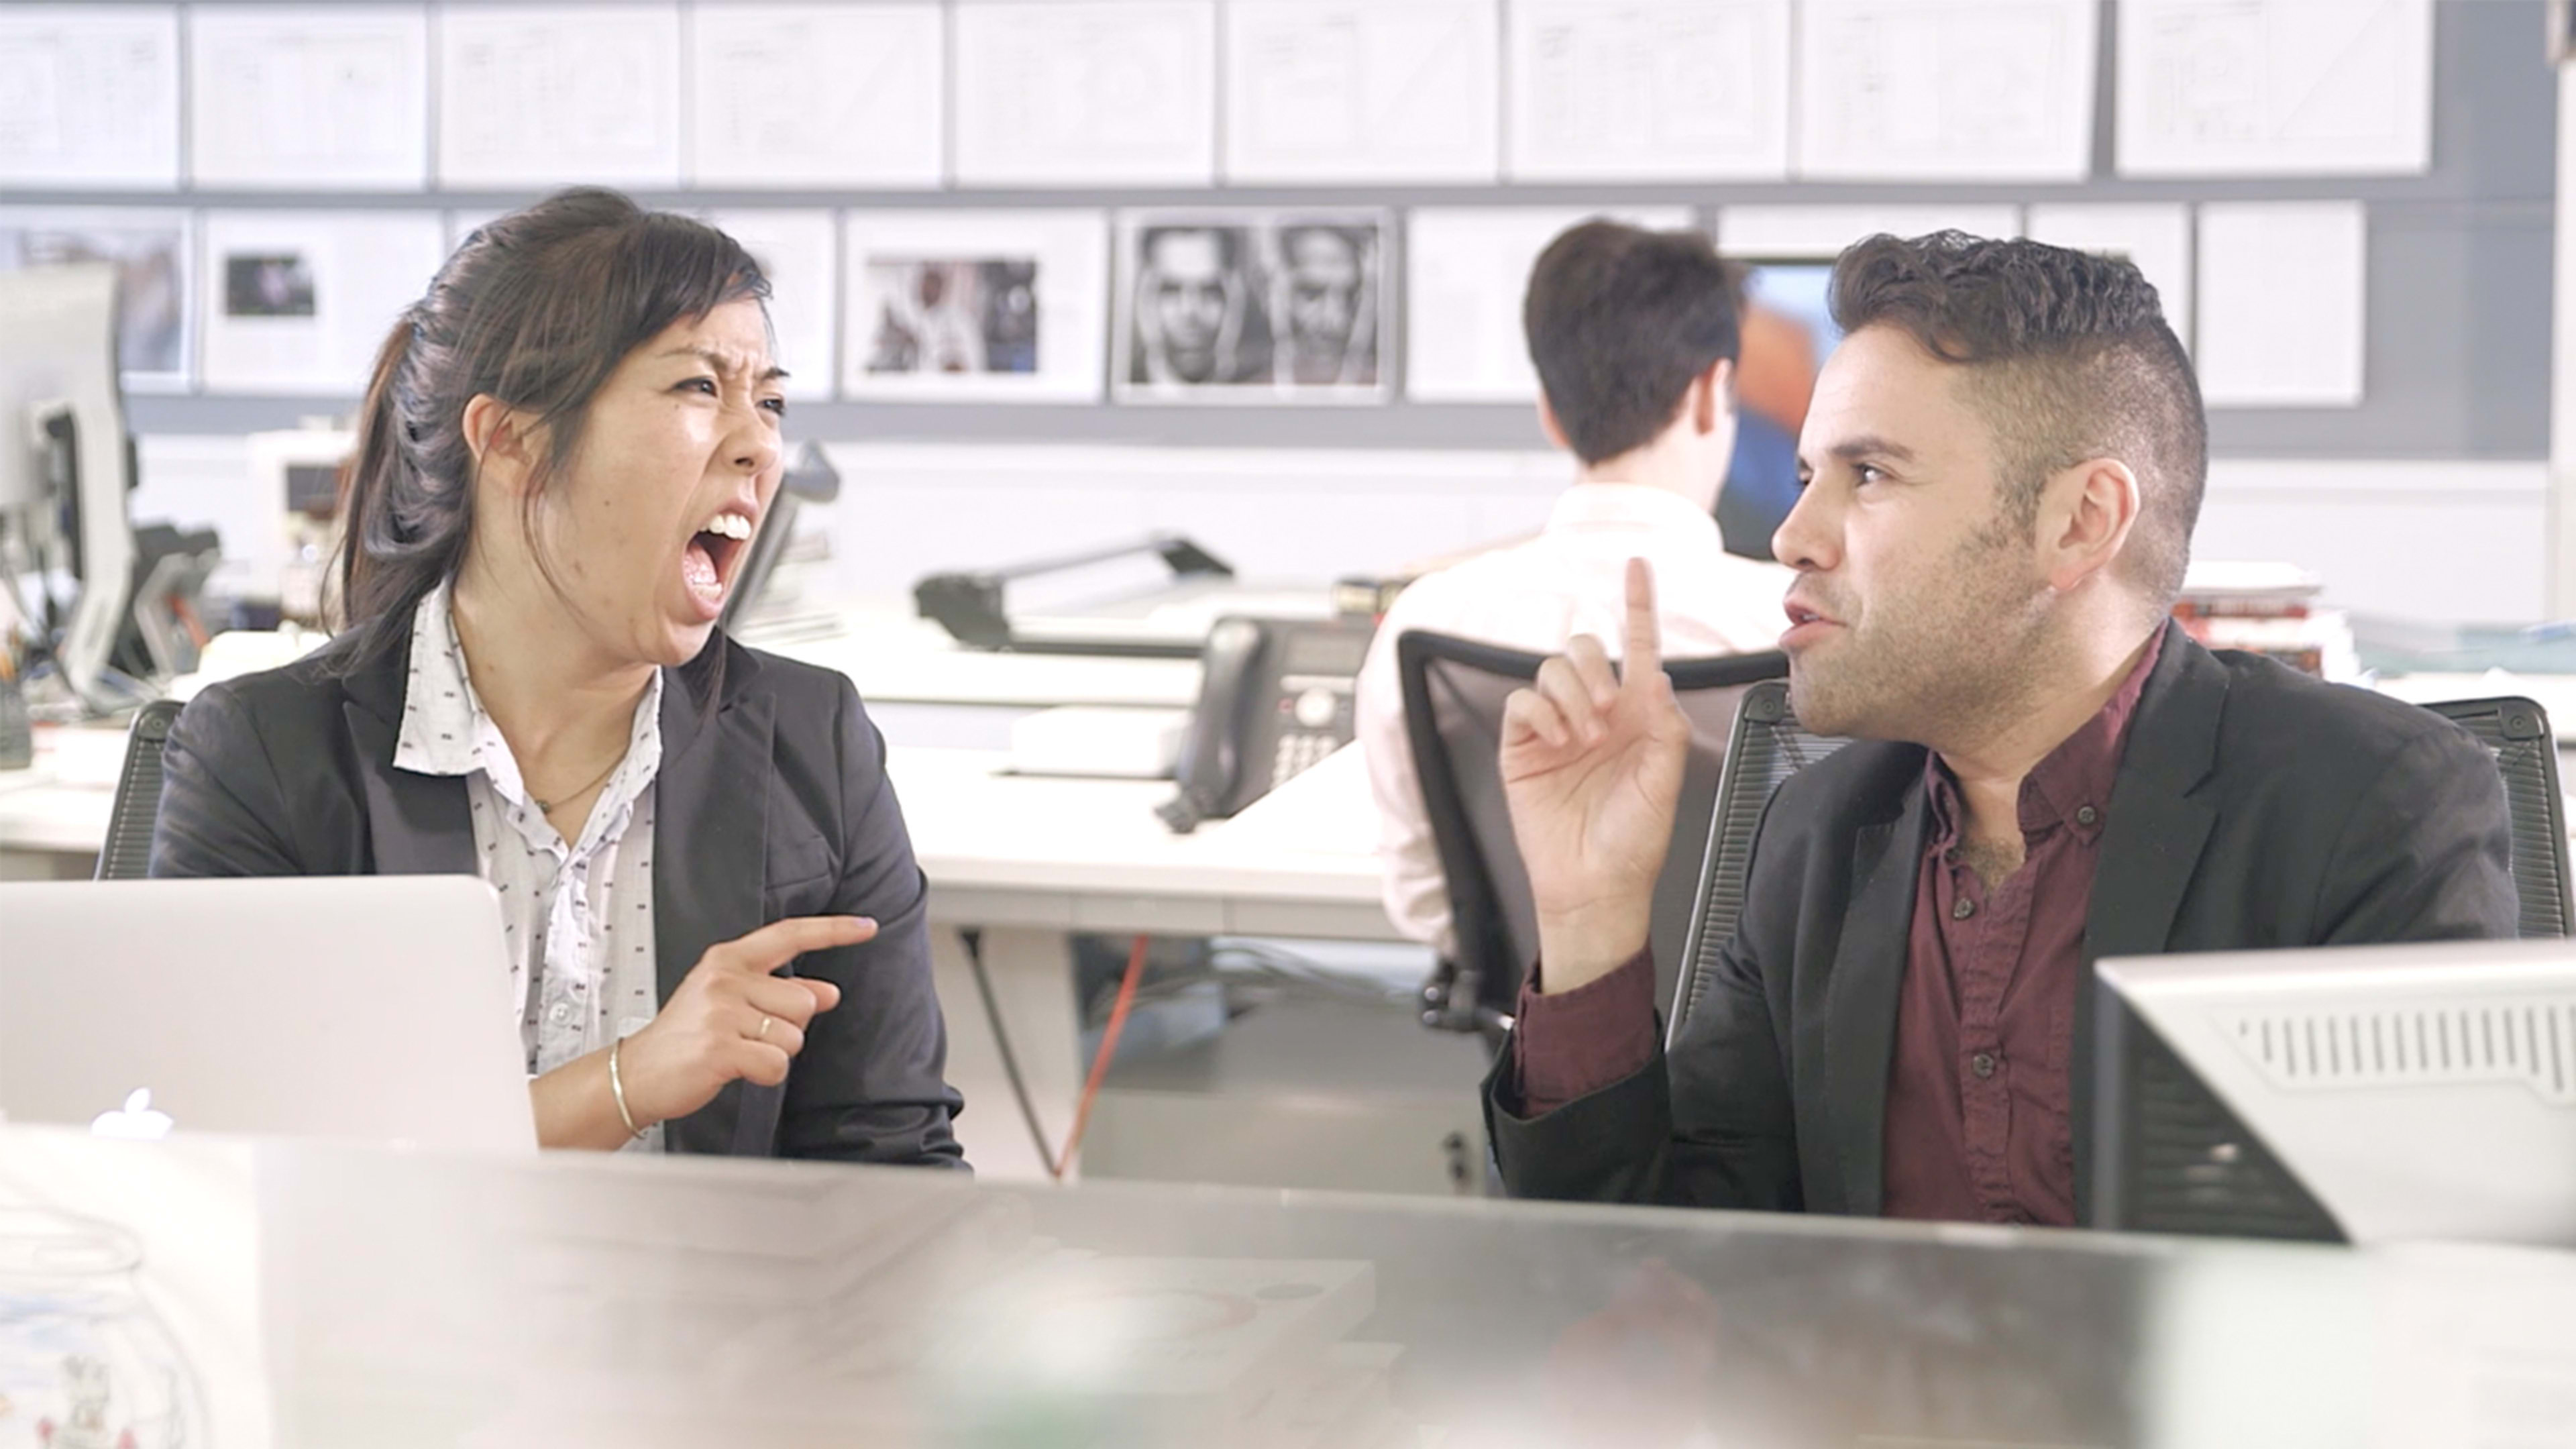 Coworkers Can’t Pronounce Your Name? Follow These Rules To Stay Sane